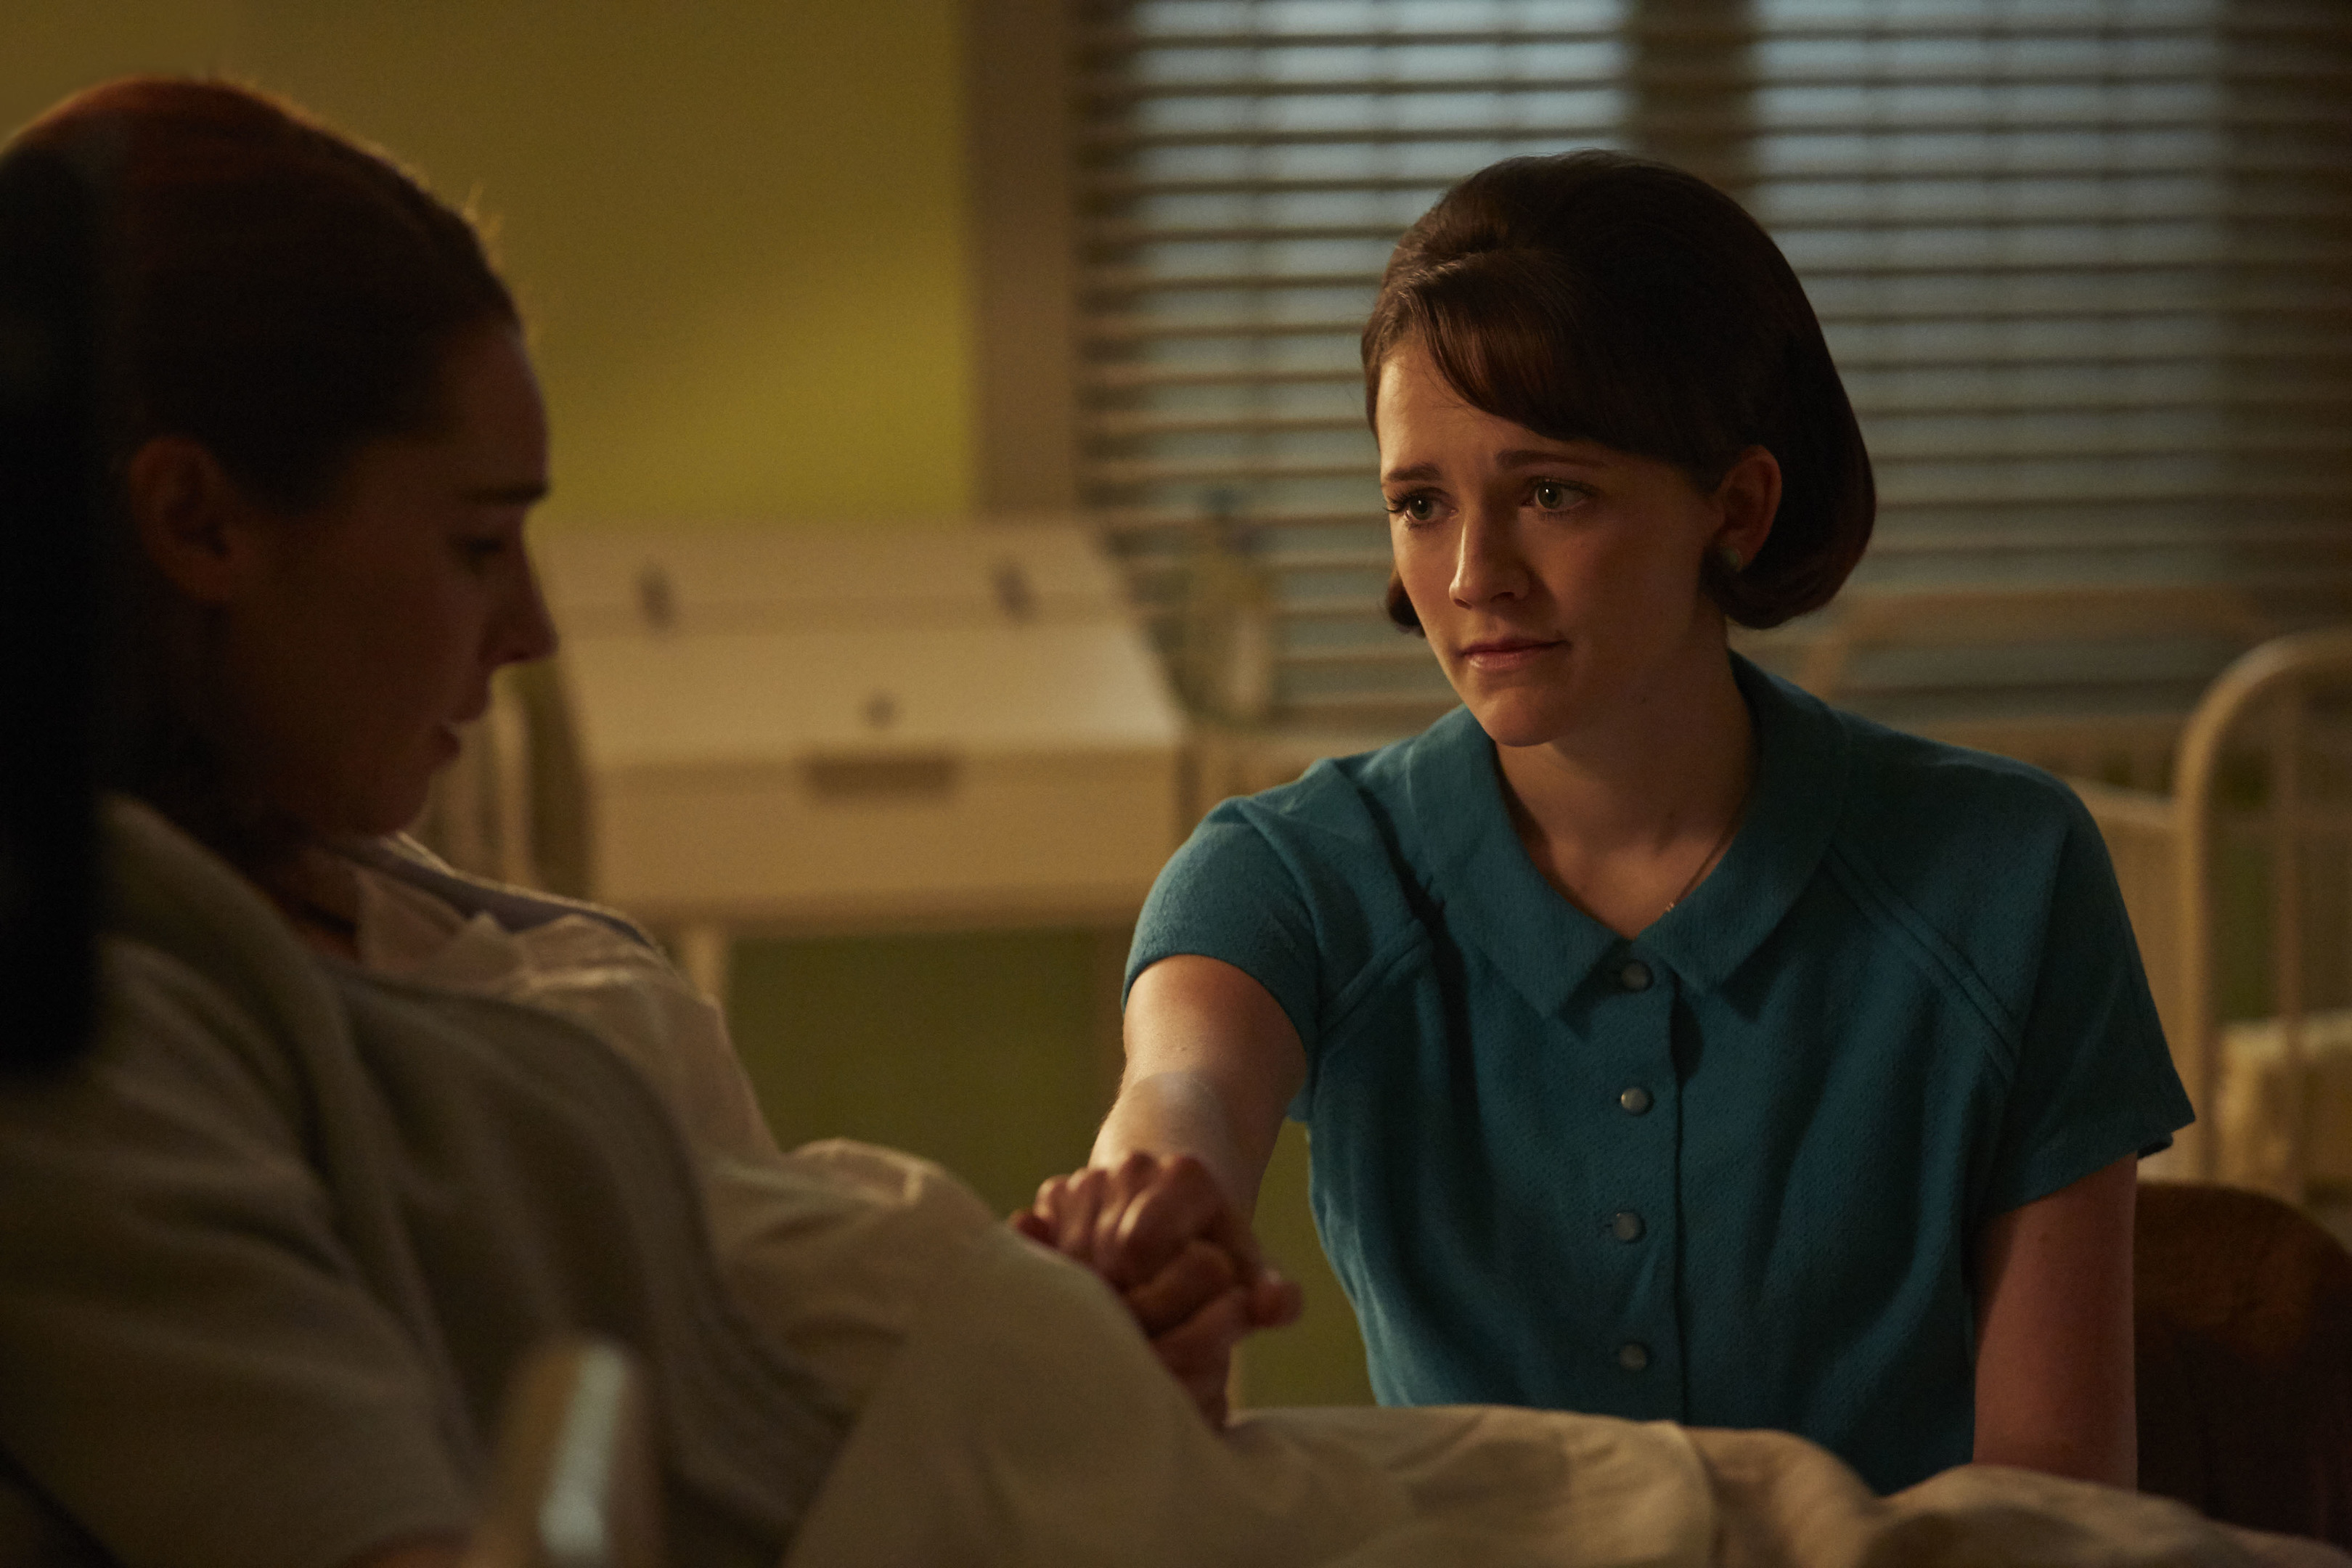 Viewers of Call The Midwife were shocked by the sudden death of Nurse Barbara, right, played by Charlotte Ritchie (Neal Street productions / Laura Radford)